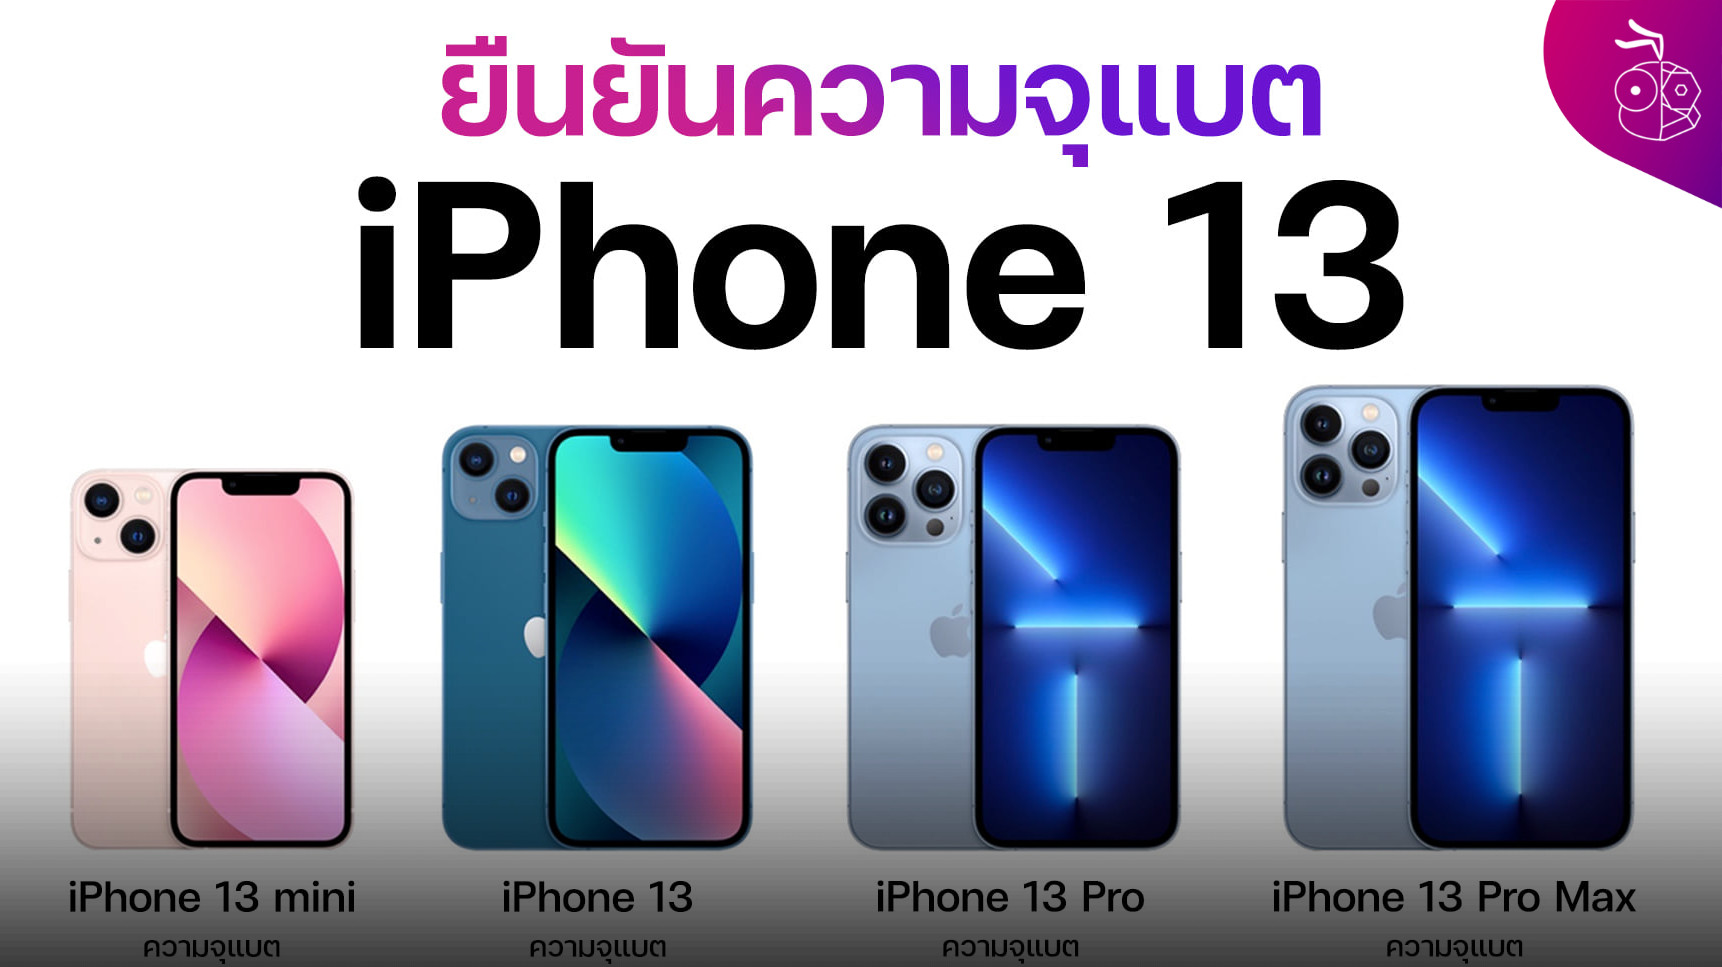 Confirmed Iphone 13 Mini Iphone 13 Iphone 13 Pro And Iphone 13 Pro Max Battery Capacity Newsdir3